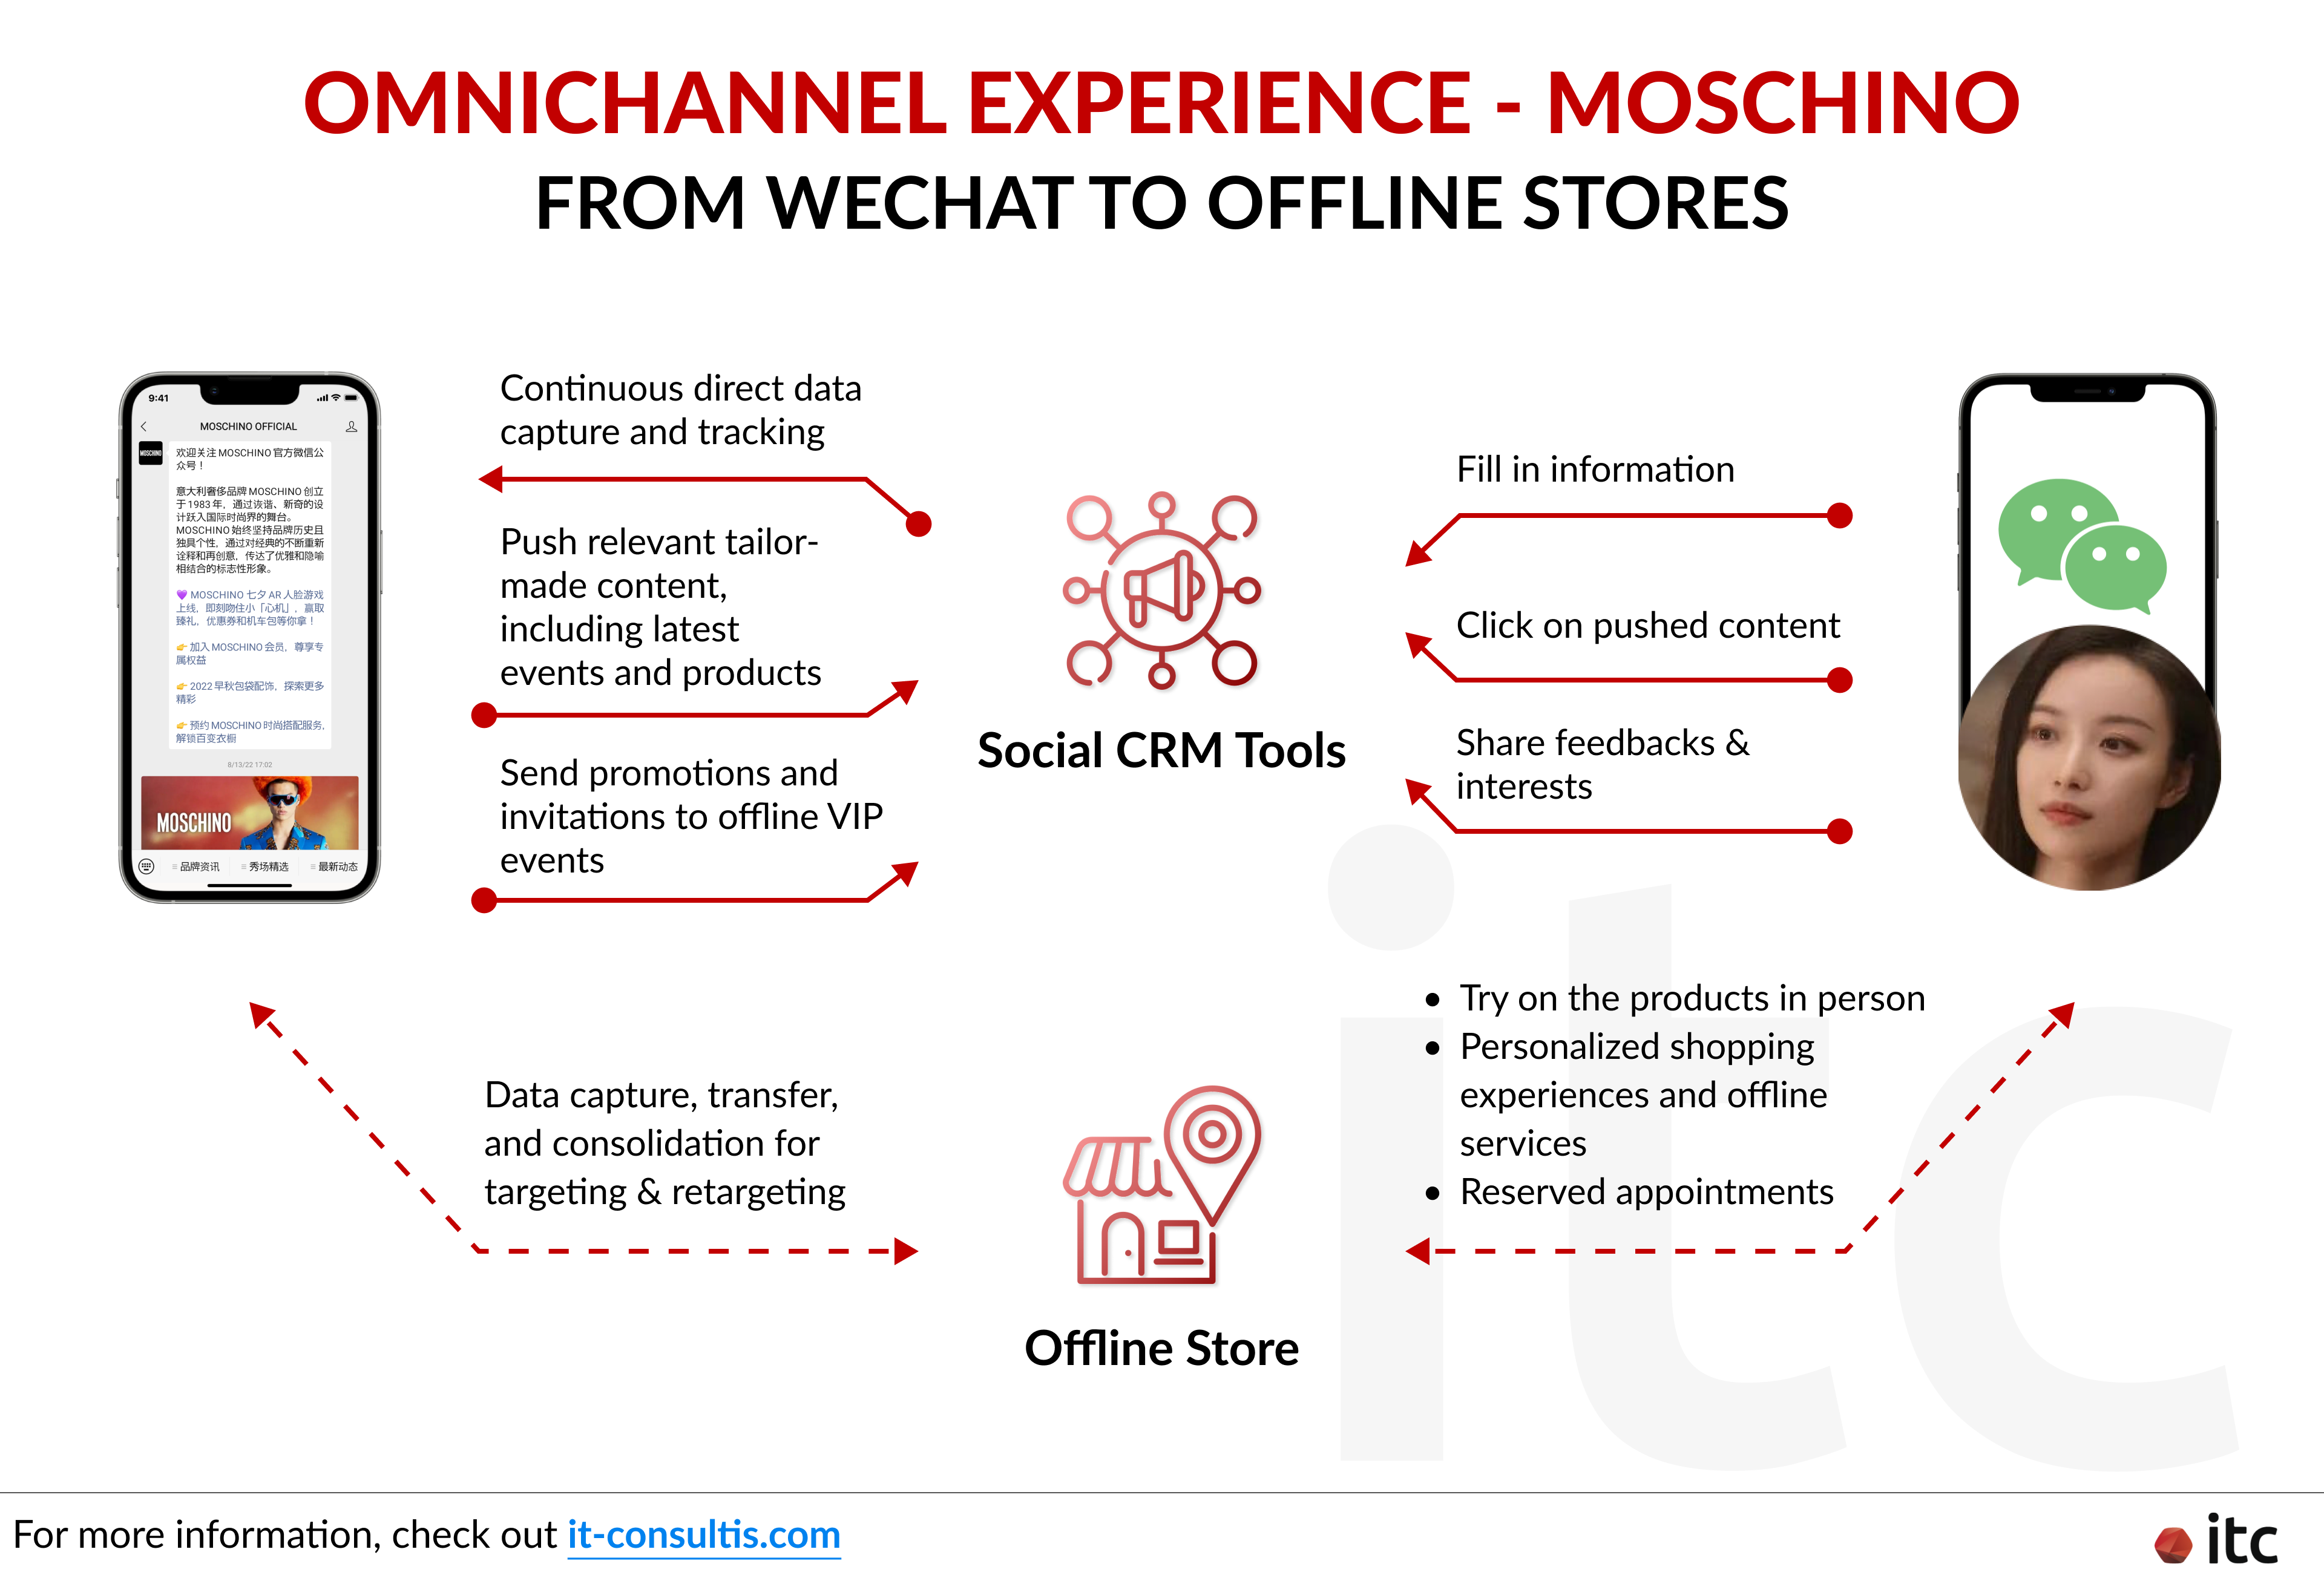 Brands can leverage marketing automation and social CRM for WeChat to drive traffic to offline stores and events